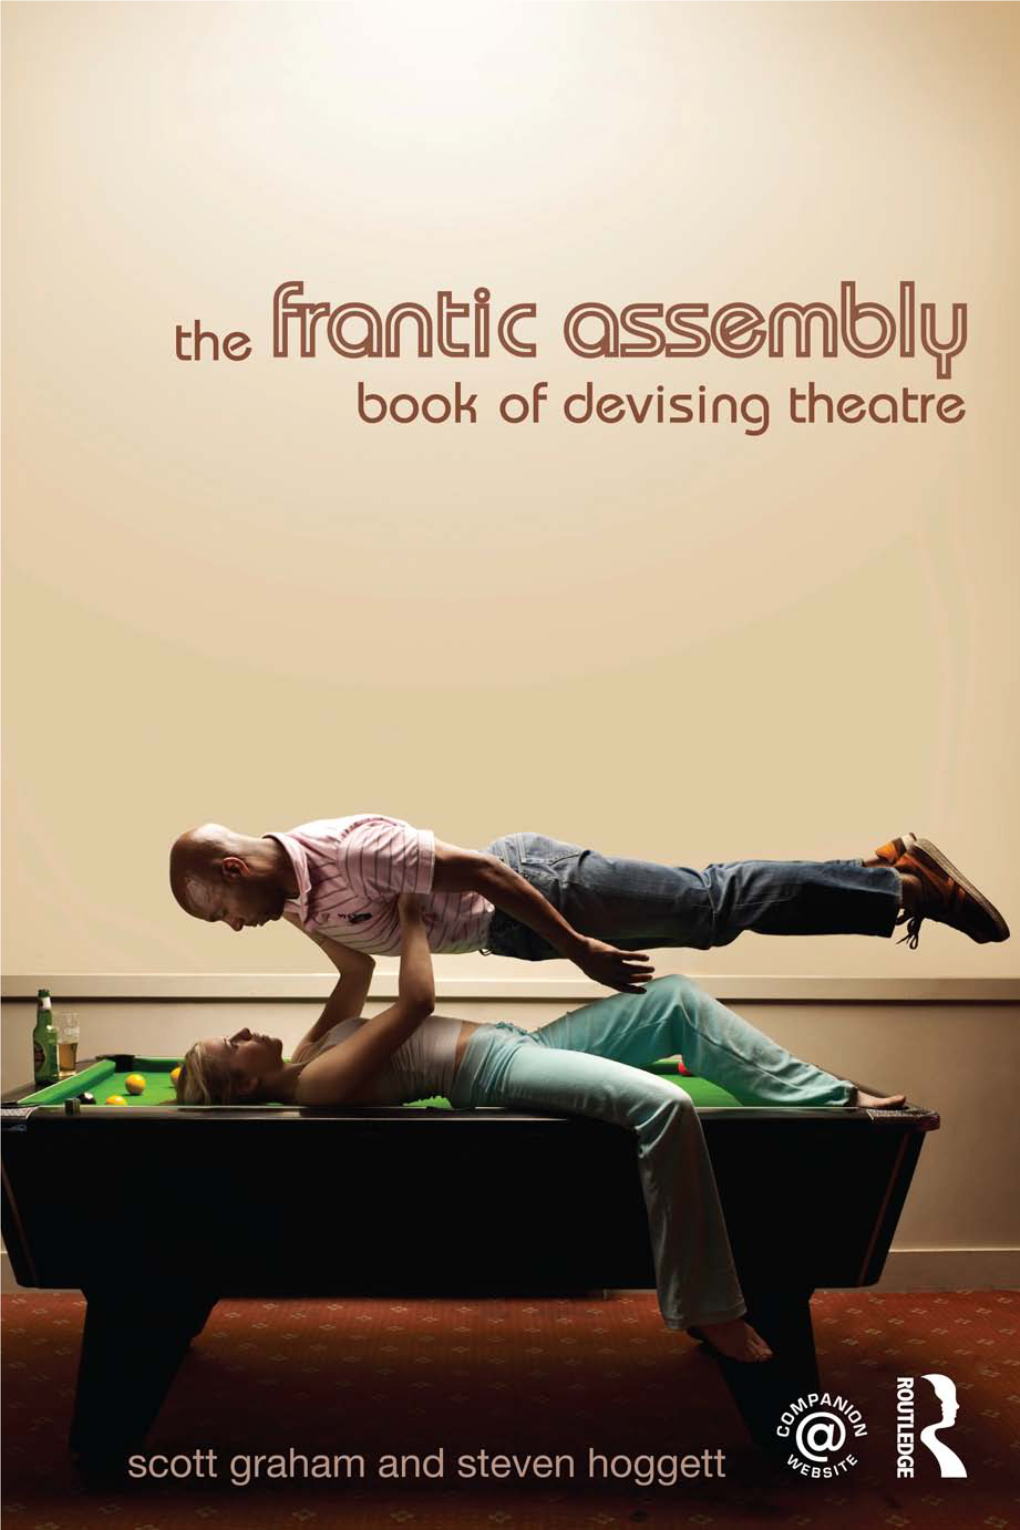 The Frantic Assembly Book of Devising Theatre Is Written by Artistic Directors Scott Graham and Steven Hoggett